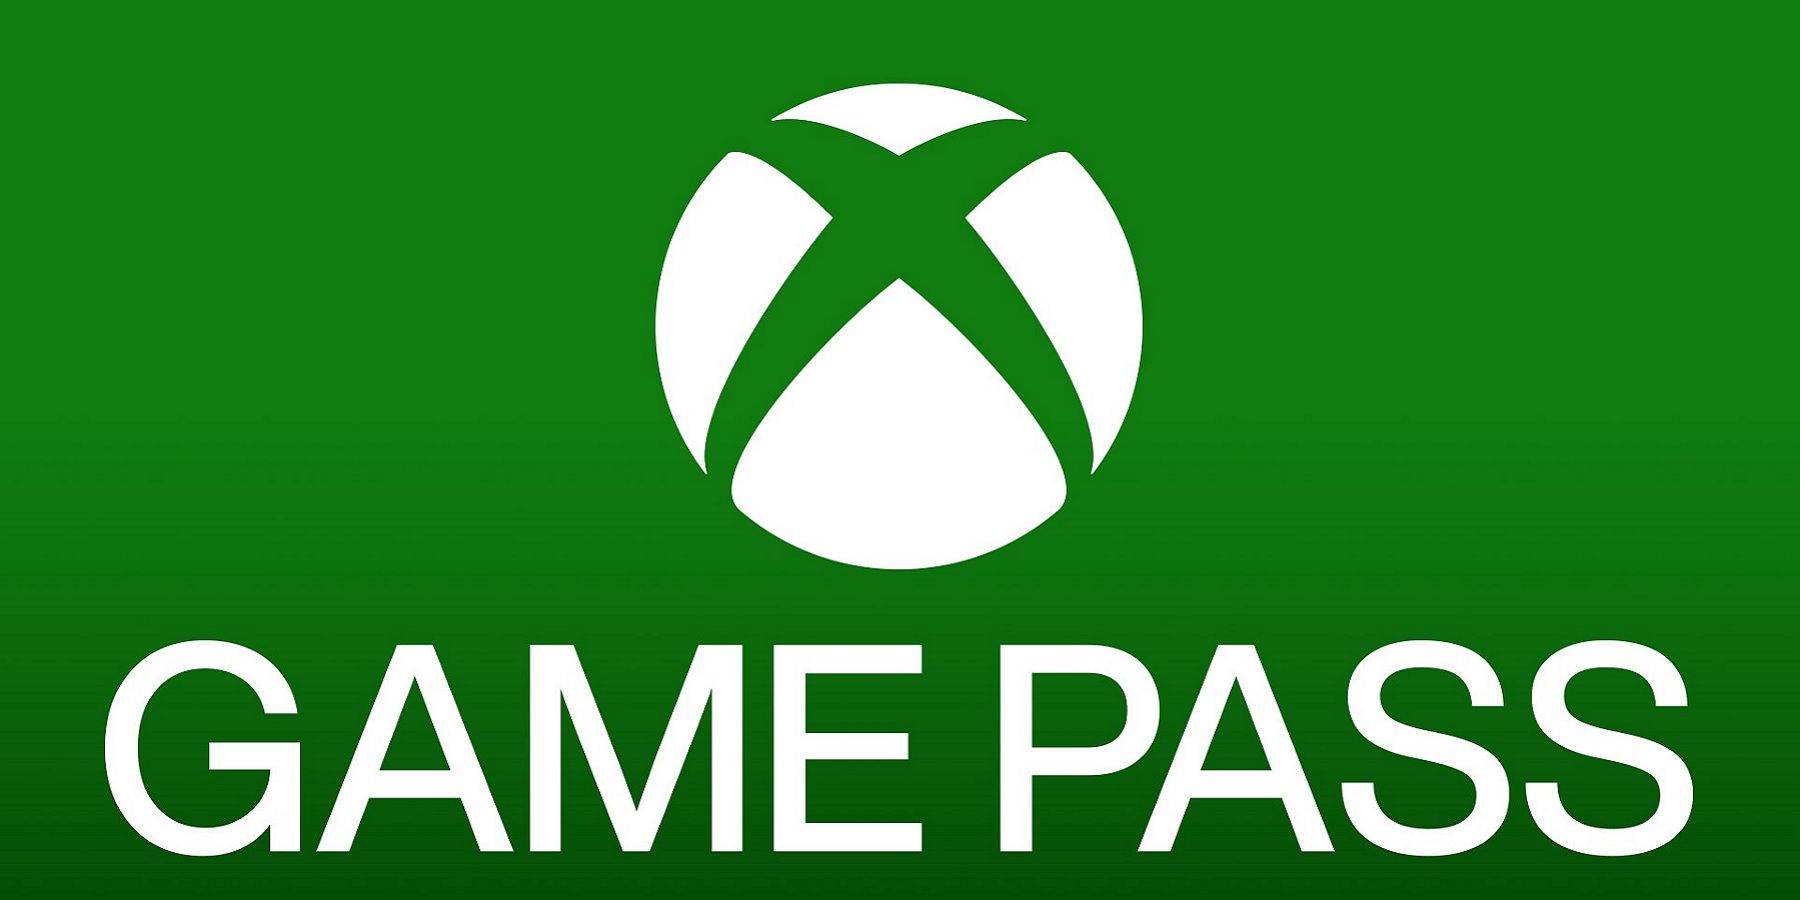 Xbox Game Pass new games for August include Cooking Simulator and more